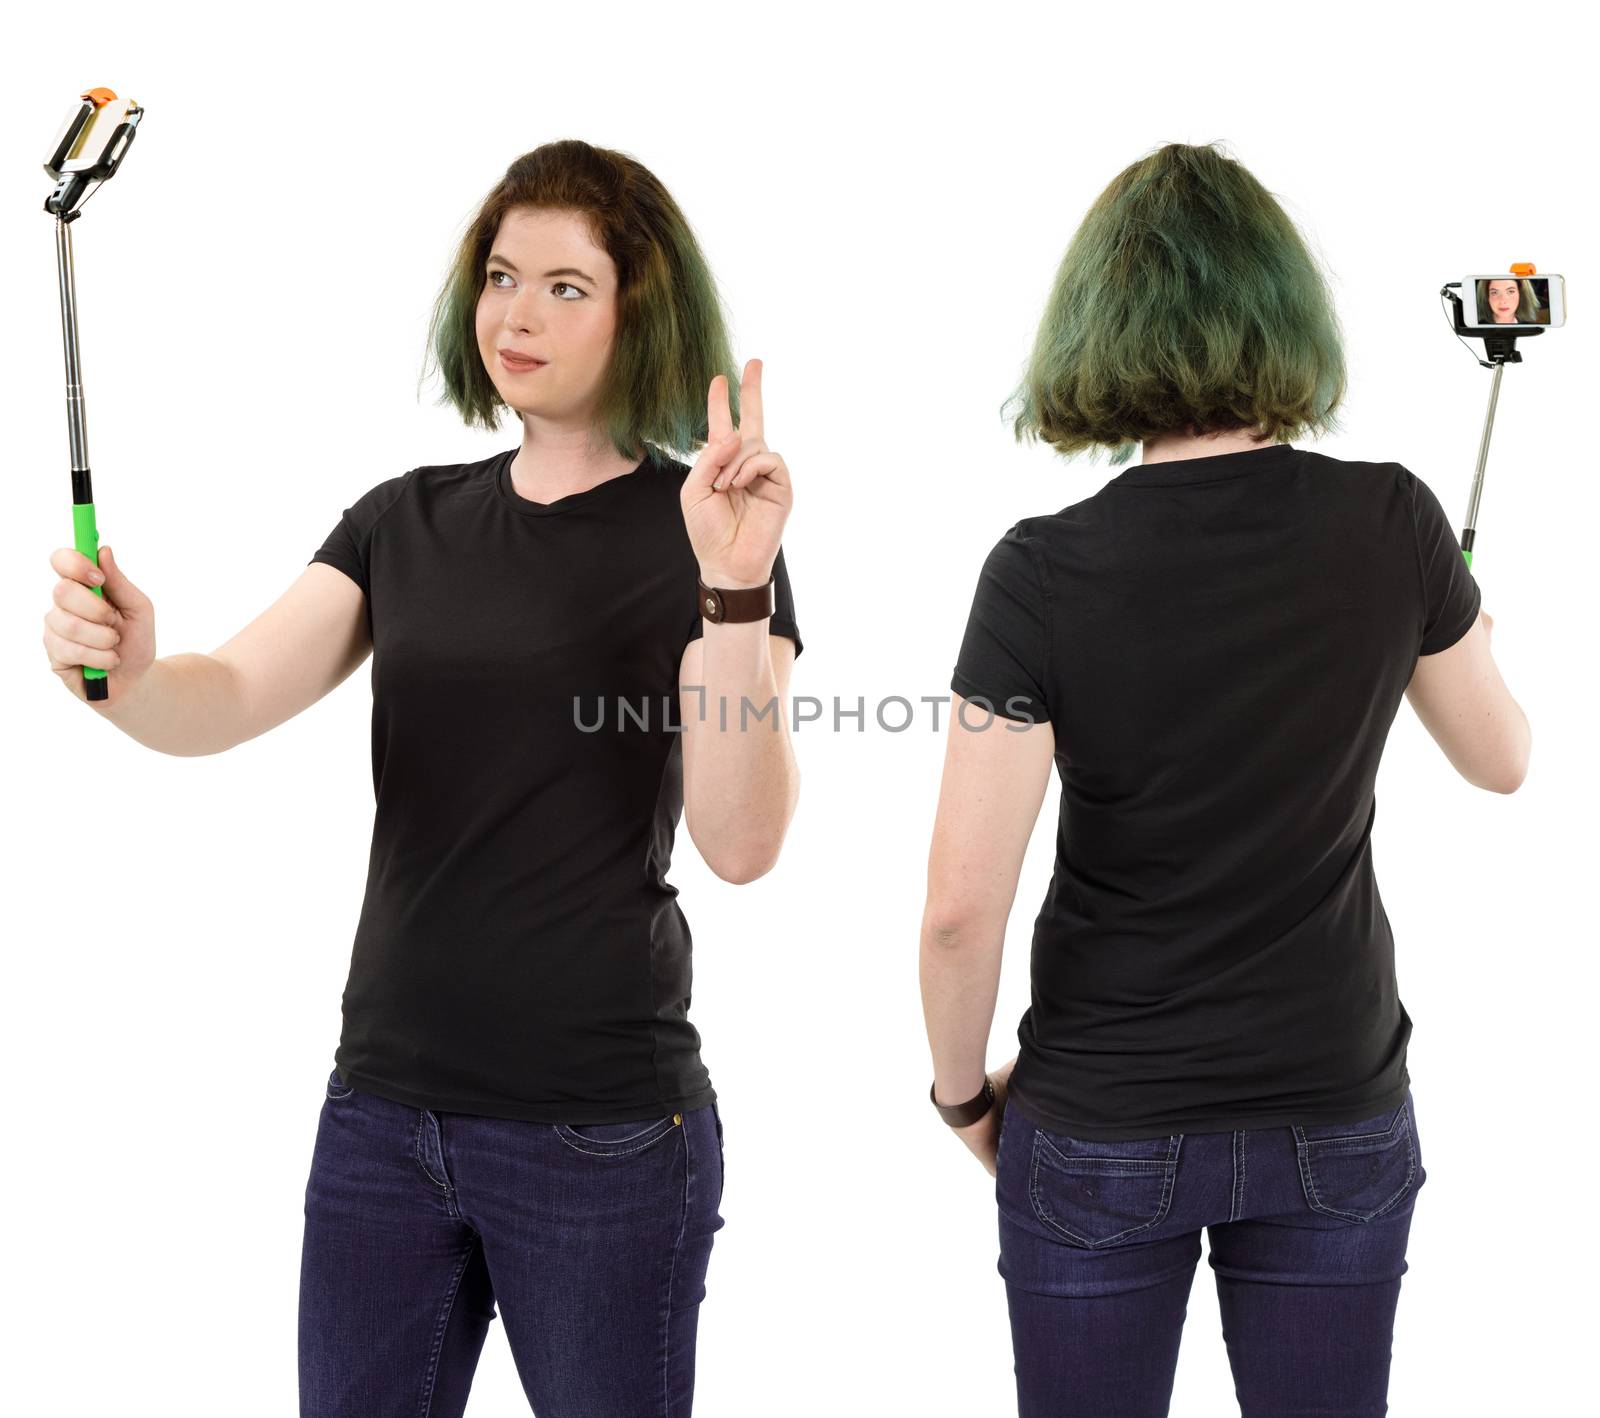 Photo of a woman with green hair posing for a selfie and wearing a blank black t-shirt, ready for your artwork or design.